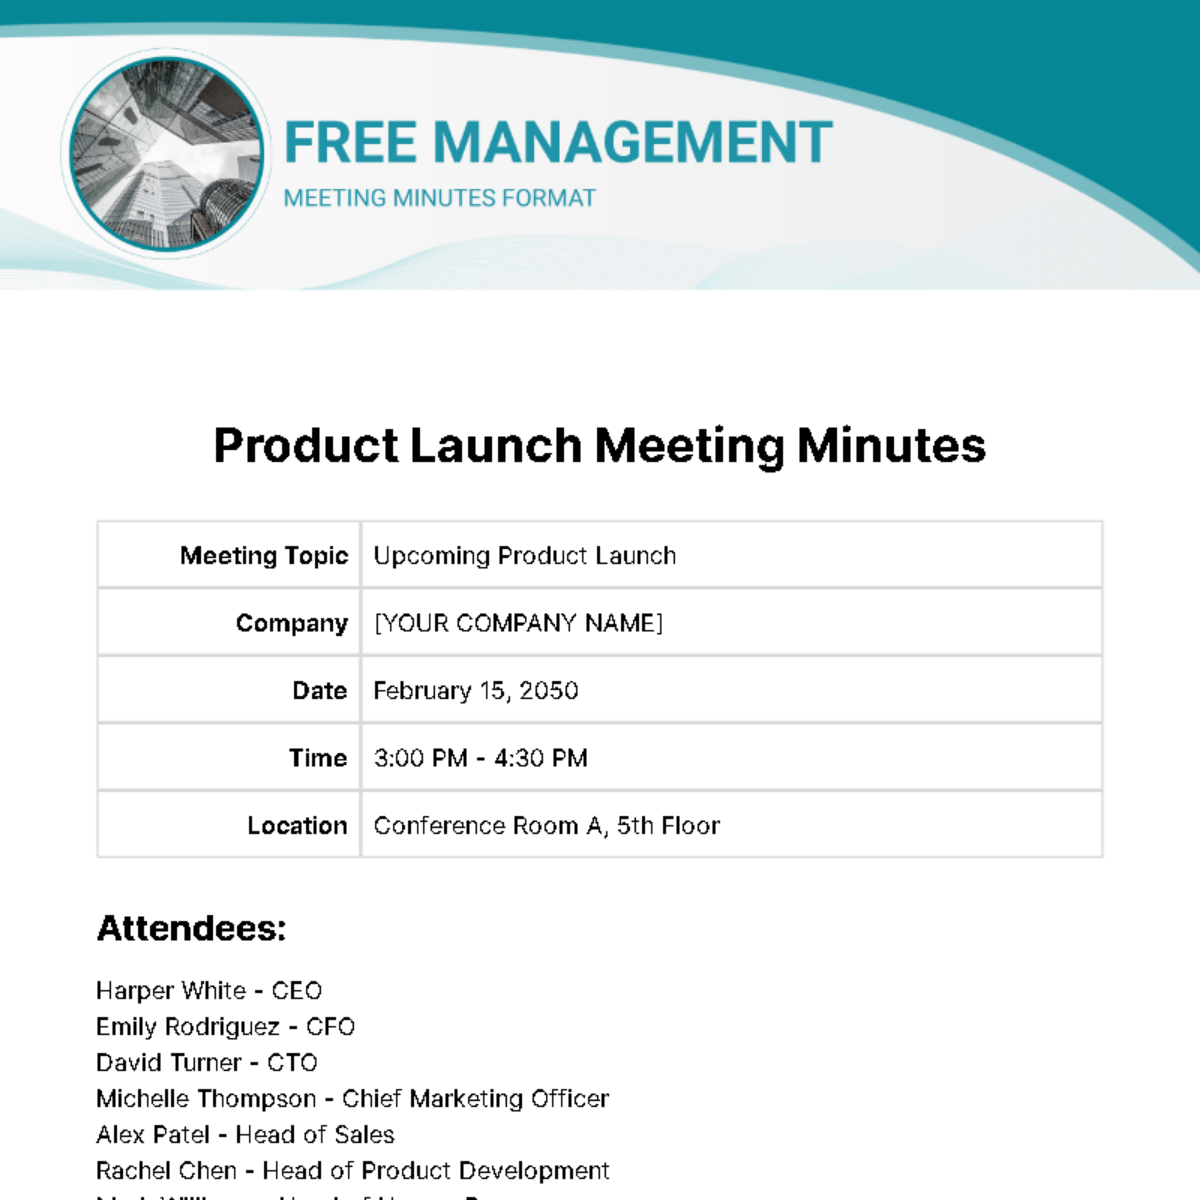 Management Meeting Minutes Format Template